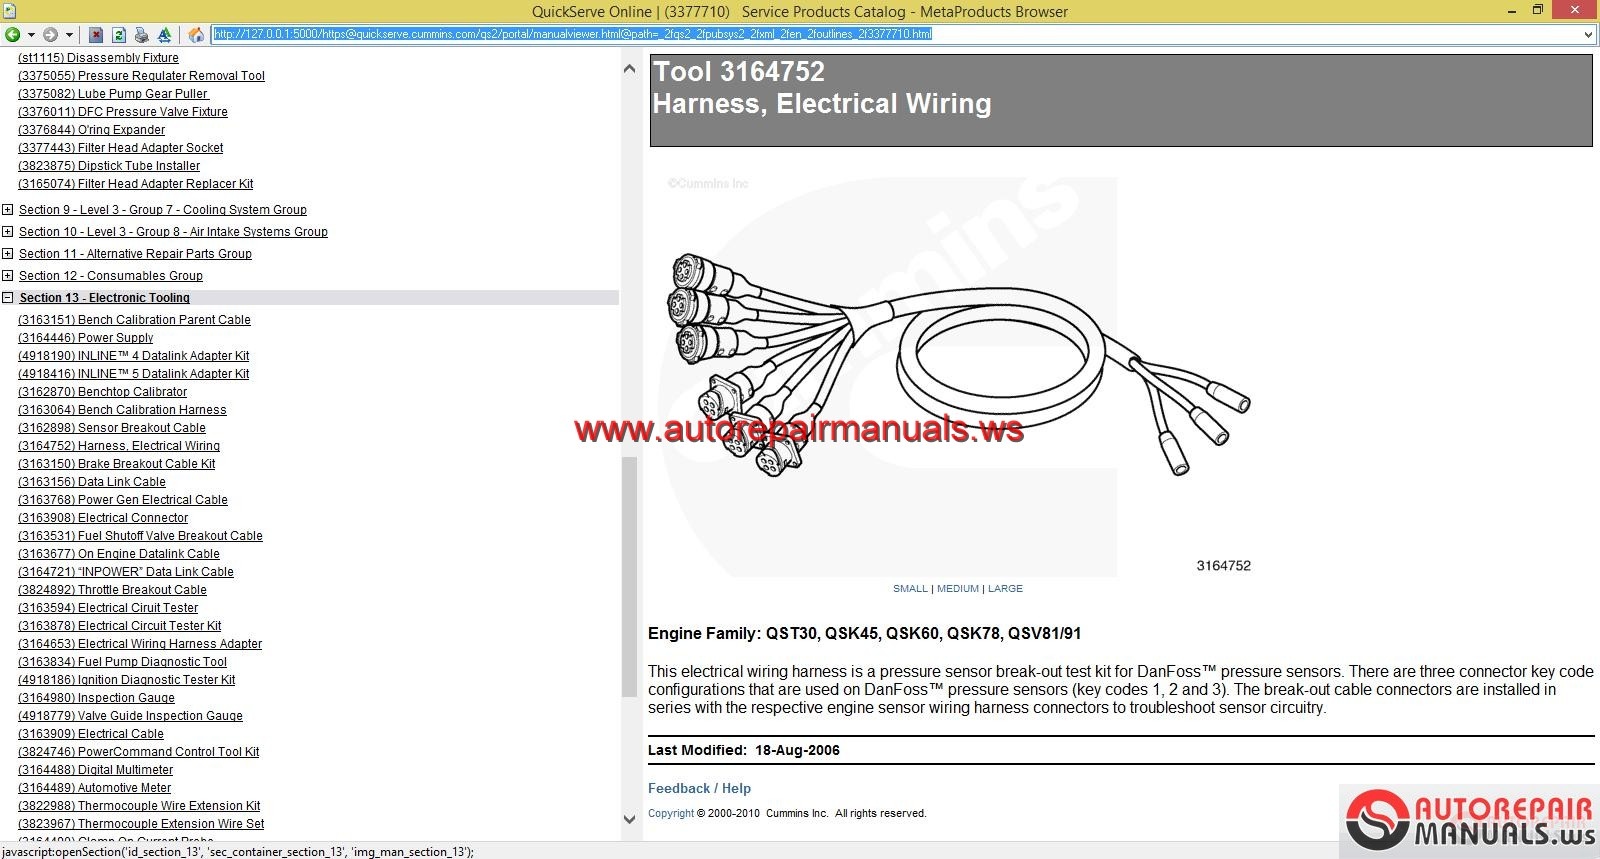 Cummins Service Product Catalog | Auto Repair Manual Forum ... wire harness inspection tools 